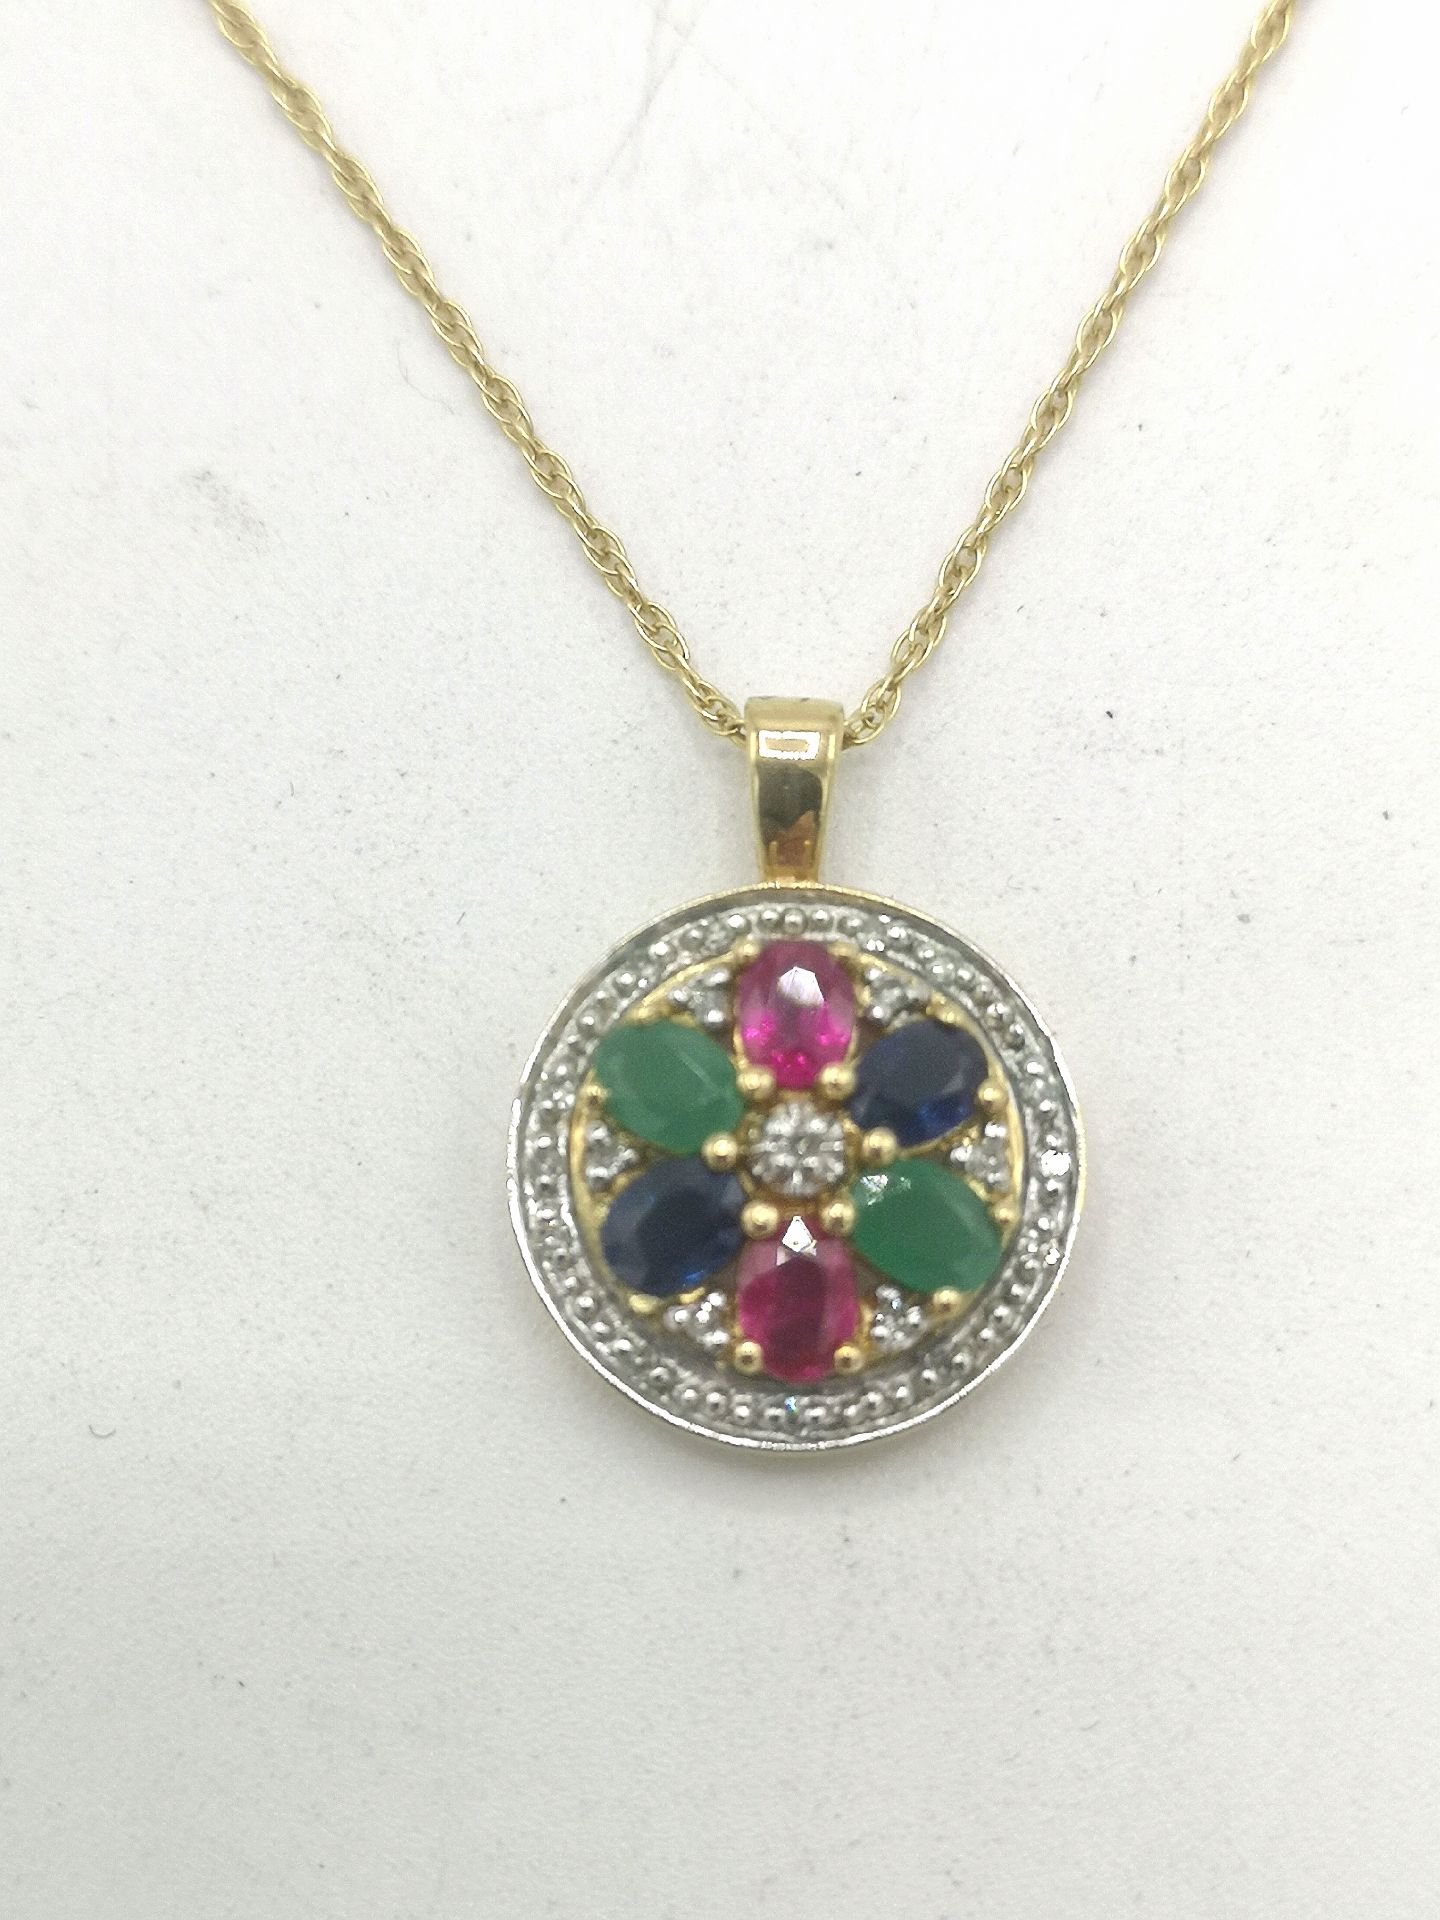 9ct gold pendant set with rubies, emeralds and sapphires - Image 7 of 8